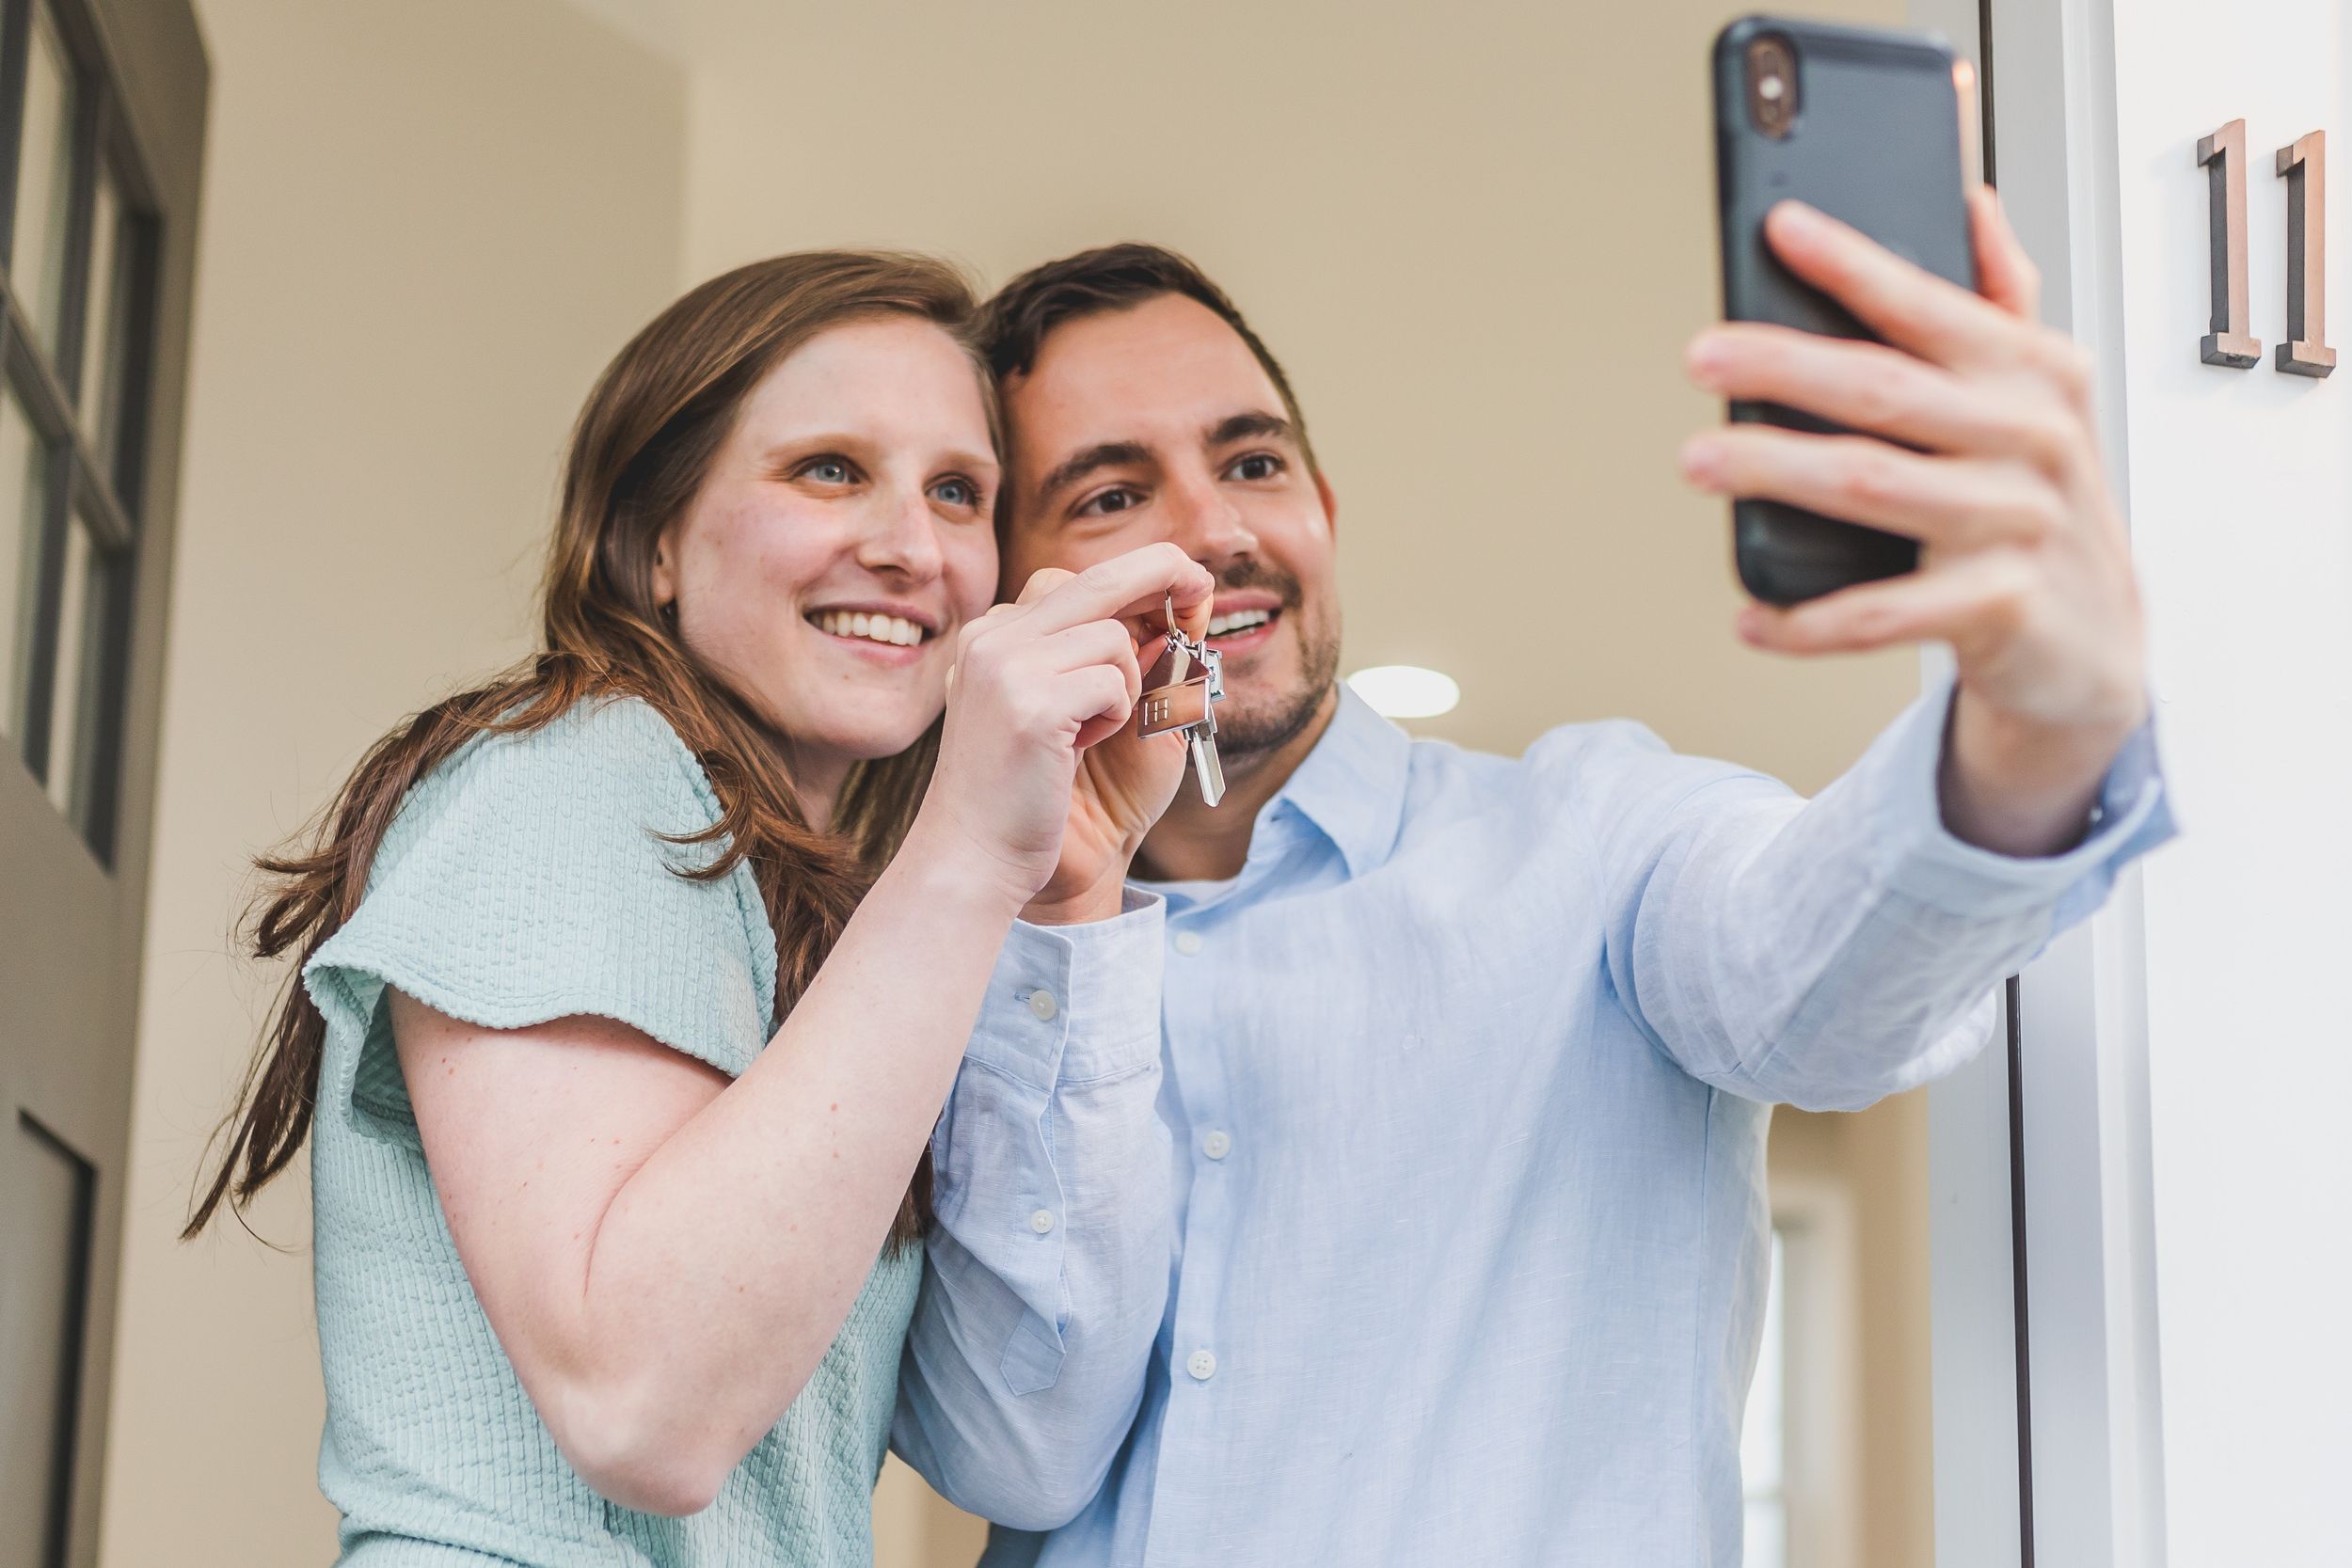 Young couple takes a selfie in front on a doorway while holding keys.